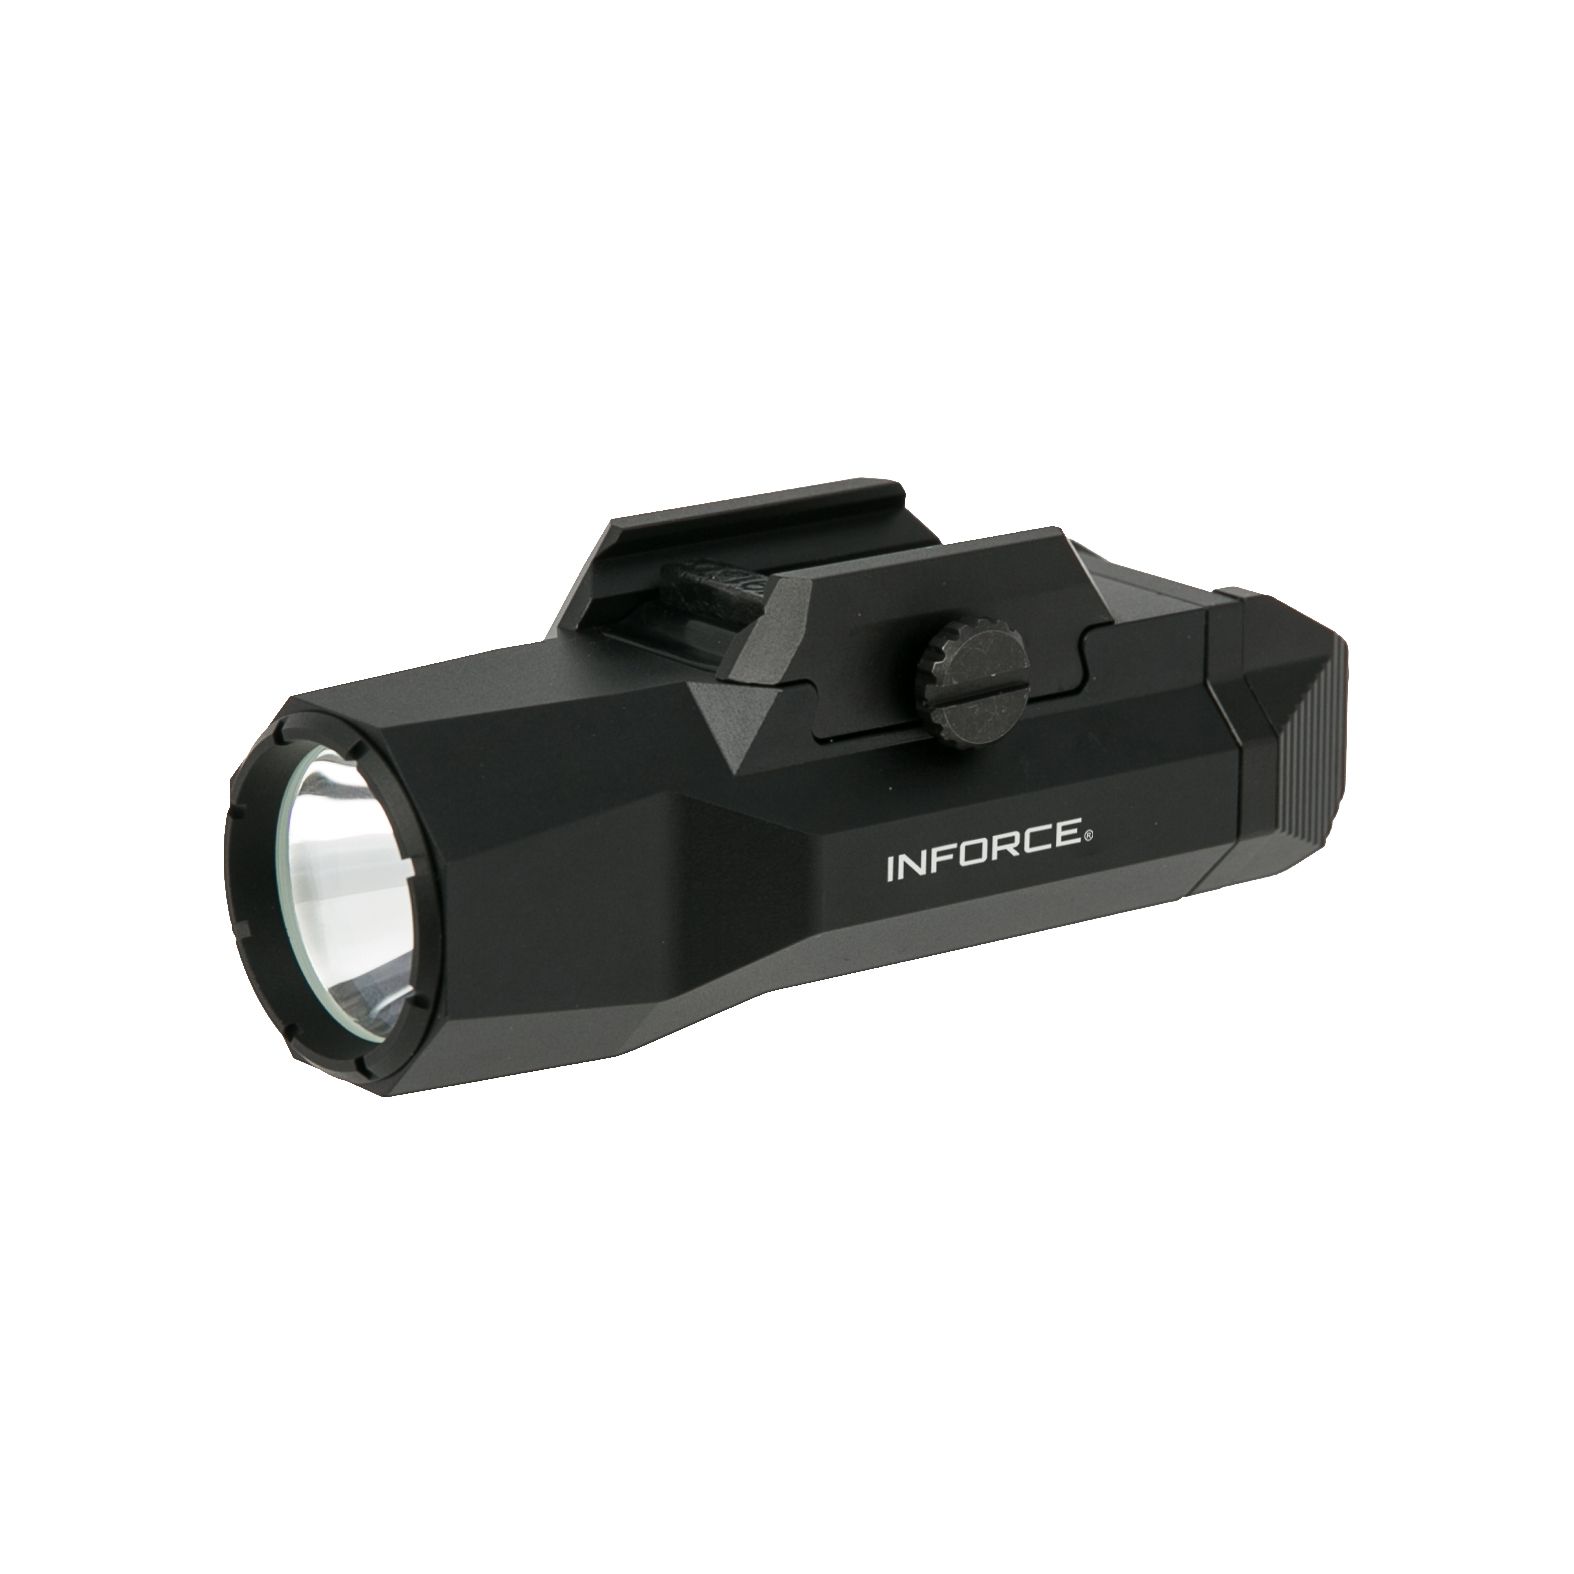 Inforce Wild 2 Weapon Integrated 1000 Lumens Lighting Device 28 Off Customer Rated W Free Shipping